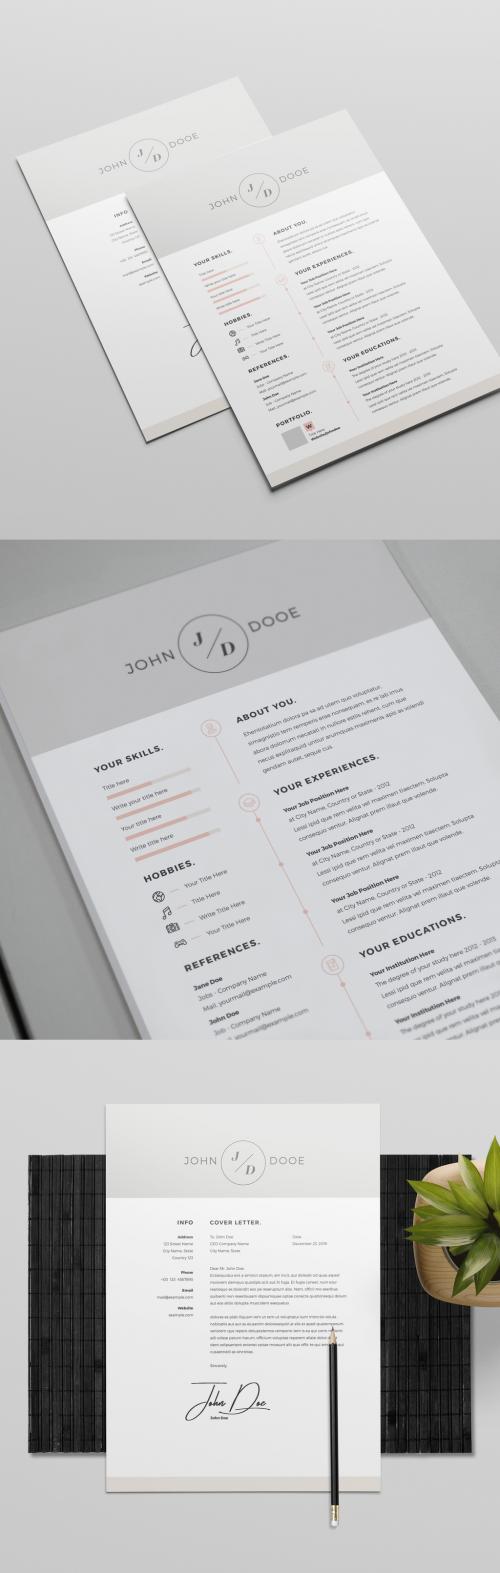 Resume Layout Set with Gray Header and Footer - 225937130